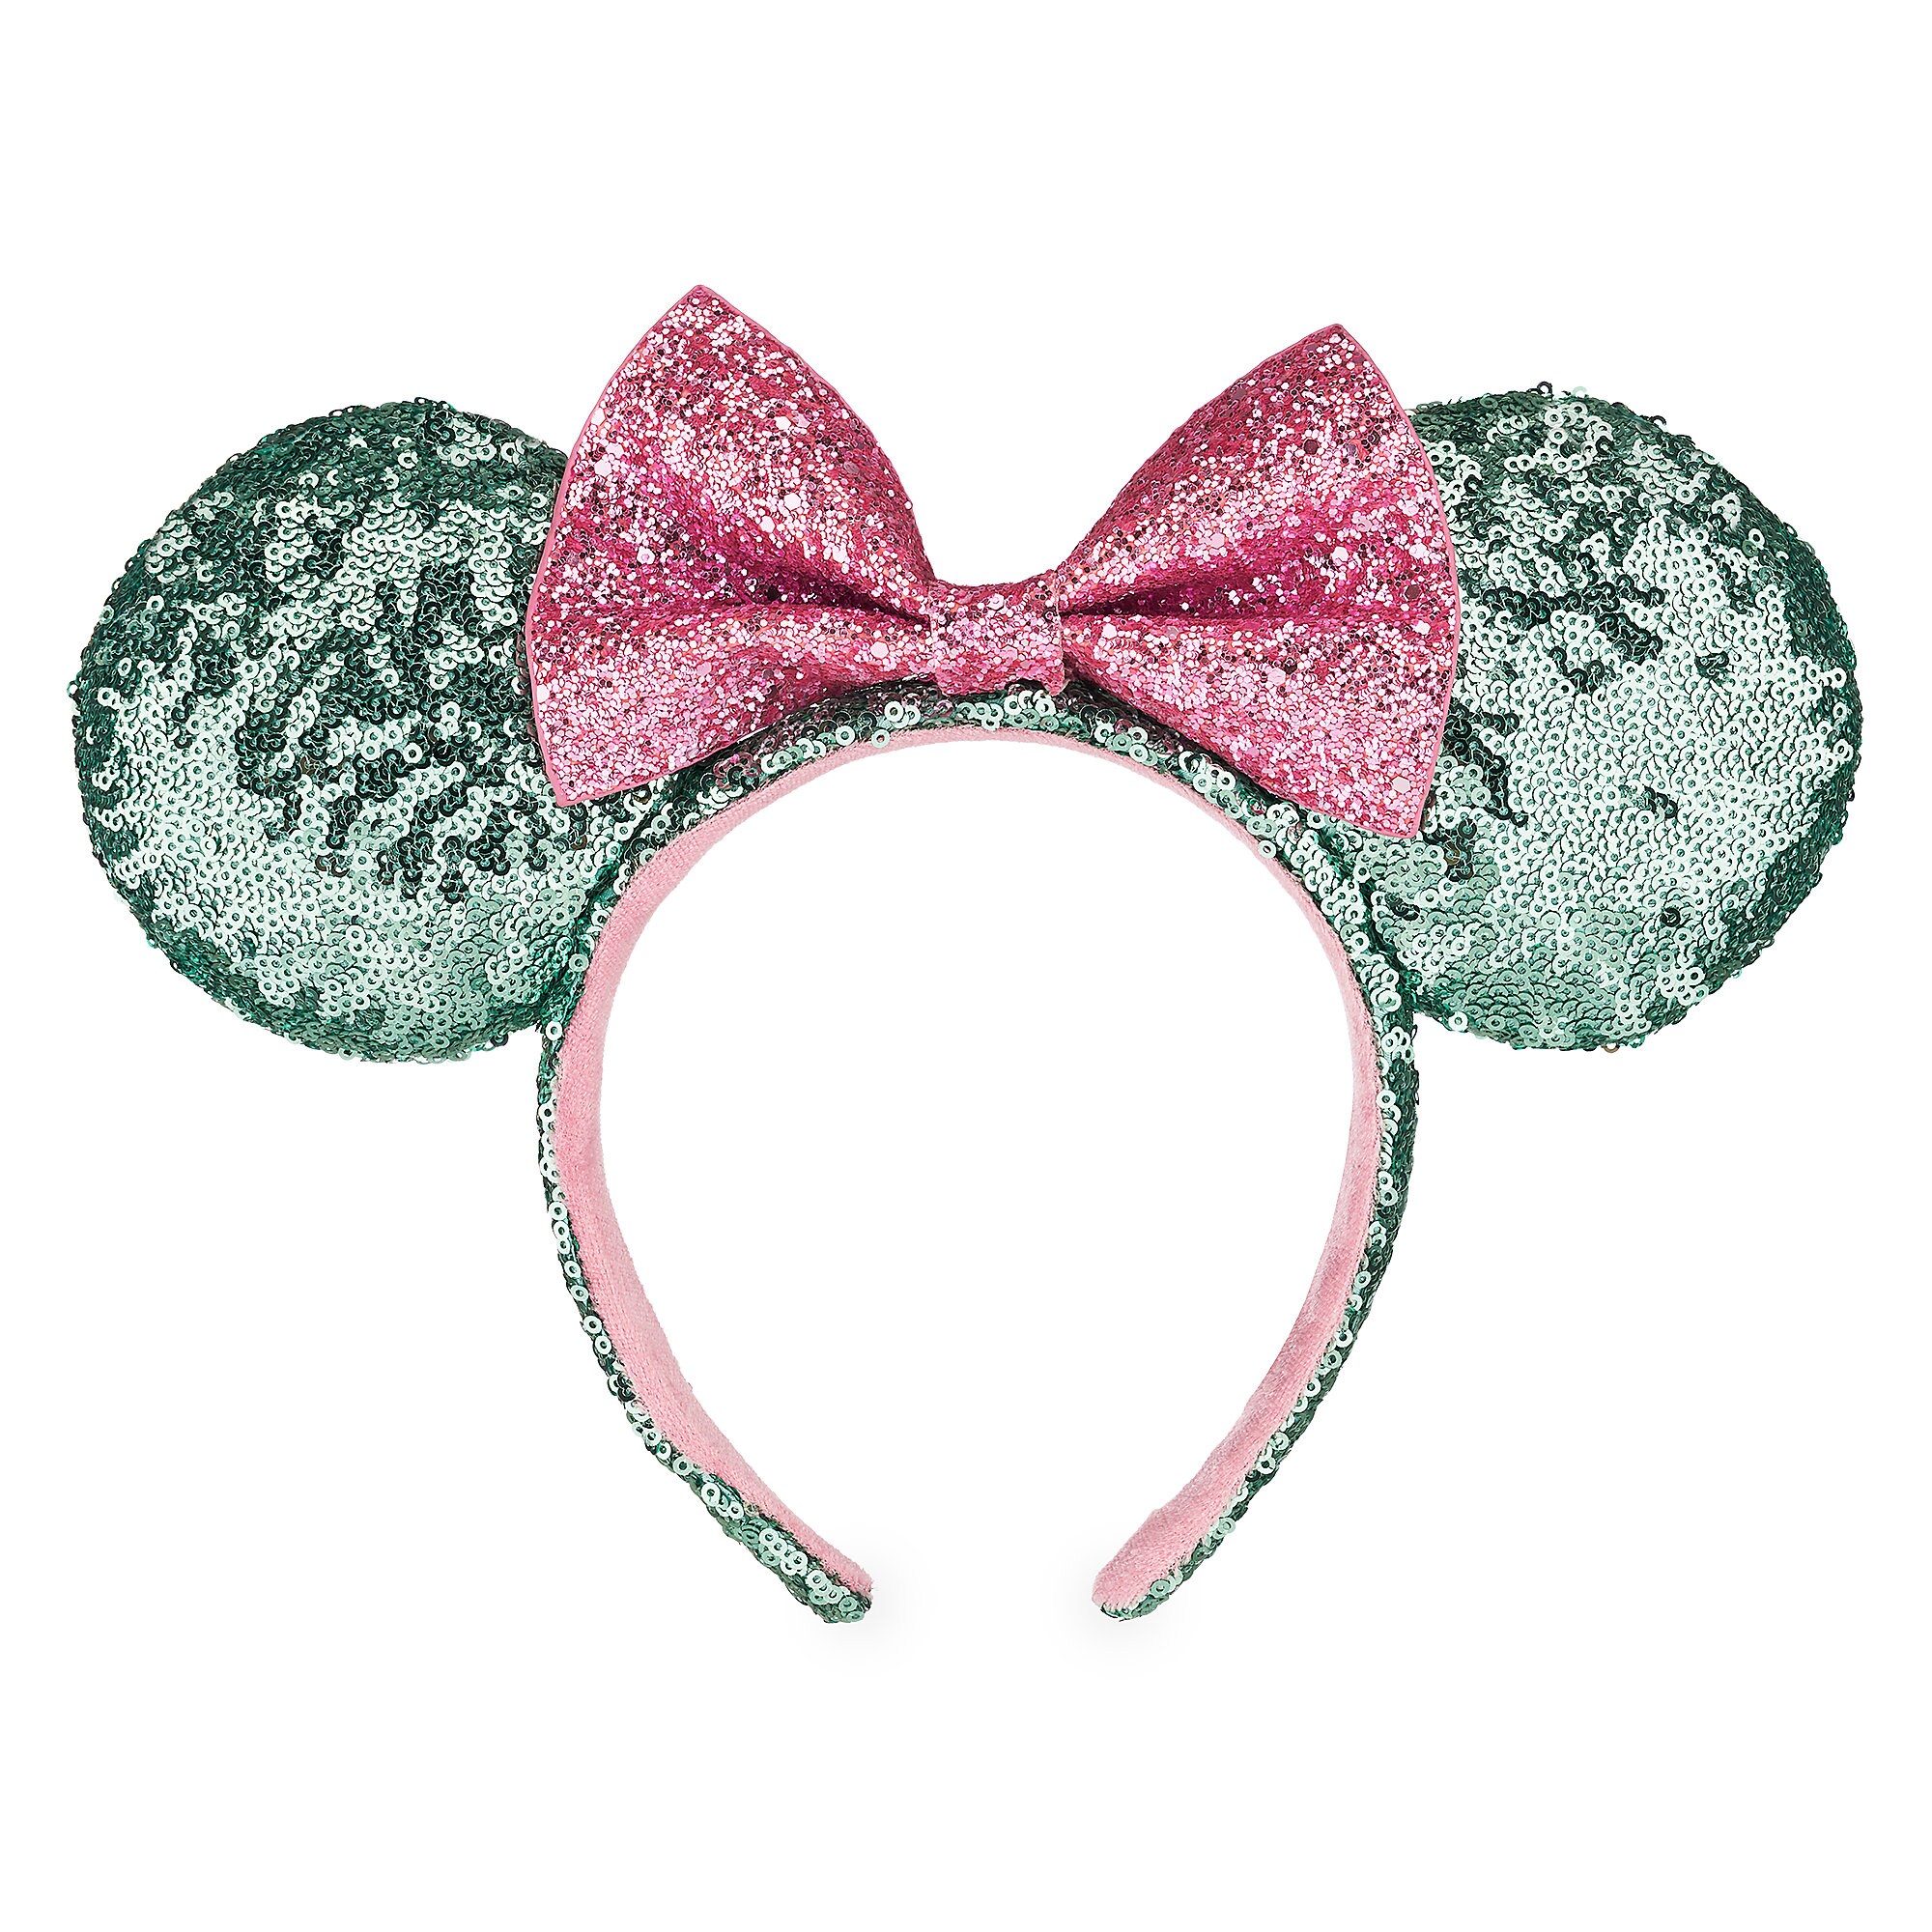 Minnie Mouse Ear Headband - Mint and Pink Sequins